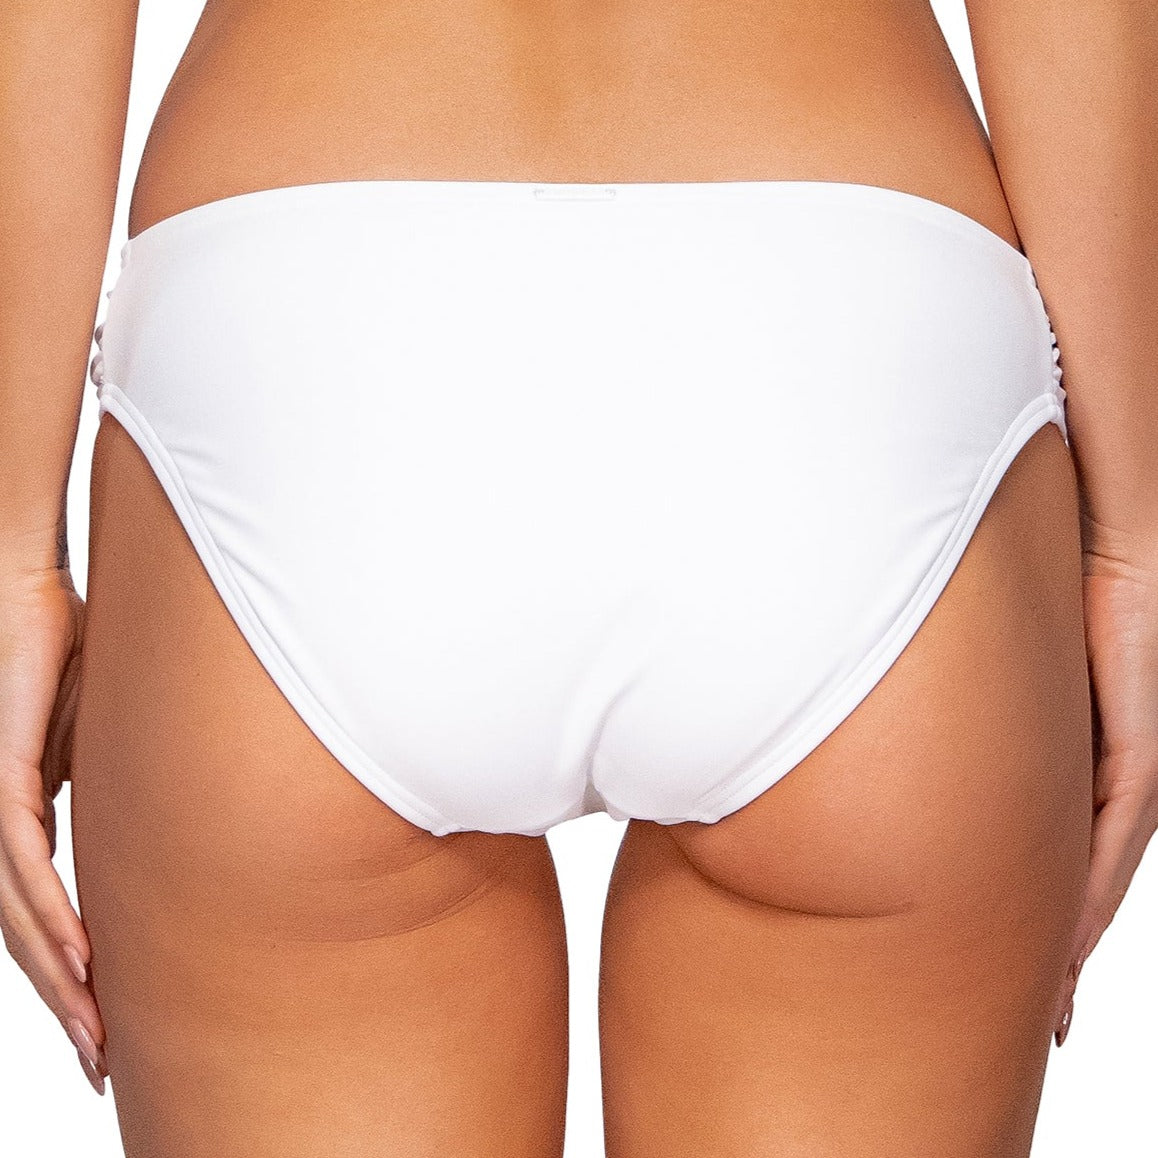 Audra Hipster - 242B - White Lily Swim - Bottoms - Hipster Sunsets, Inc.   